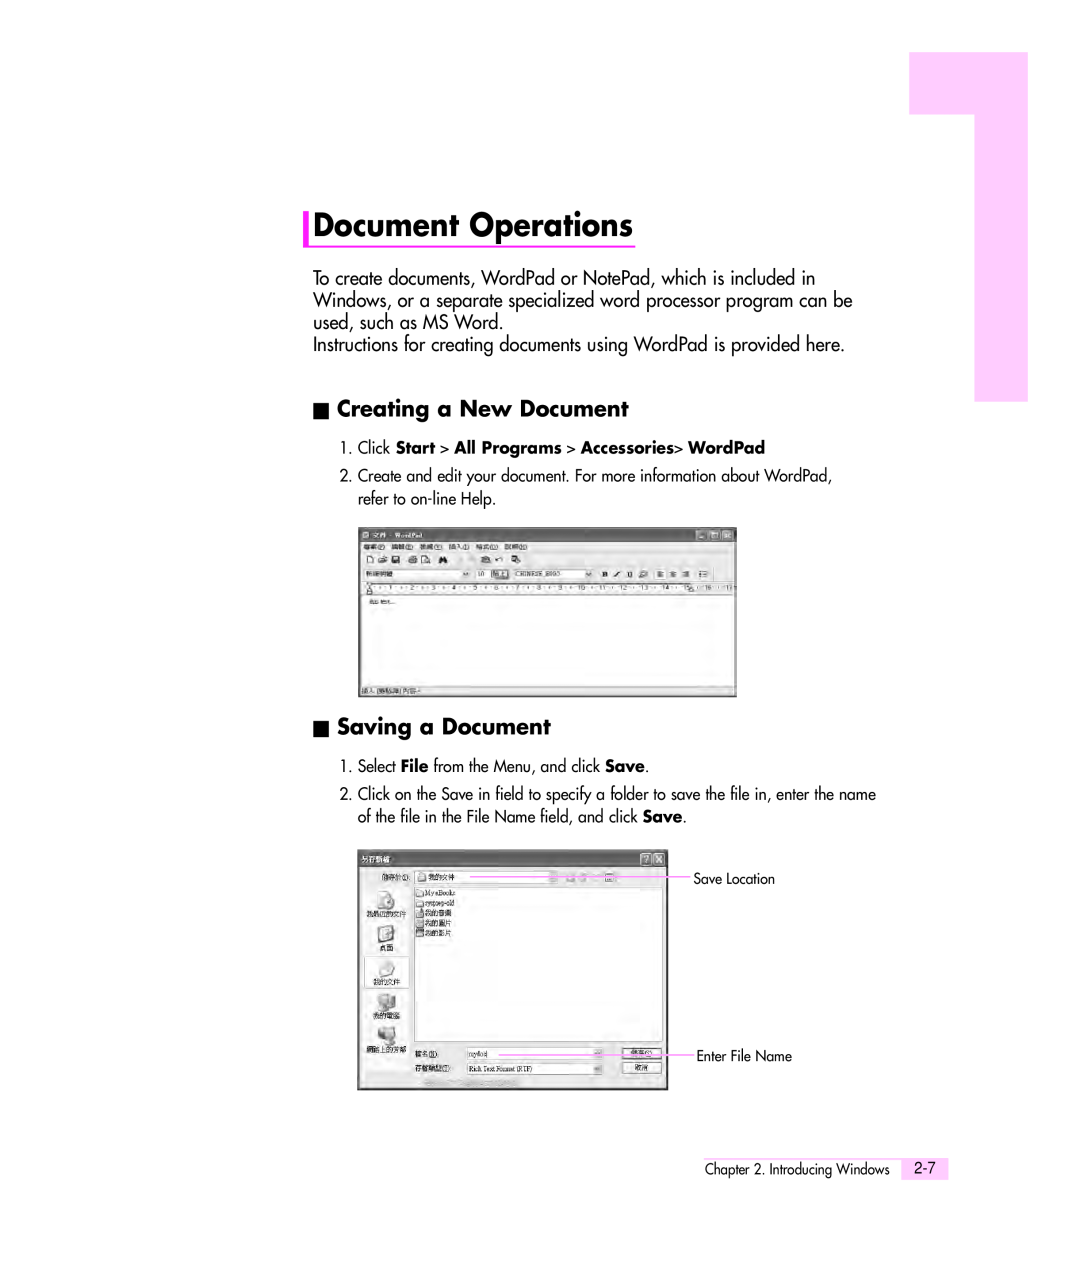 Samsung Q35 manual Document Operations, Creating a New Document, Saving a Document 